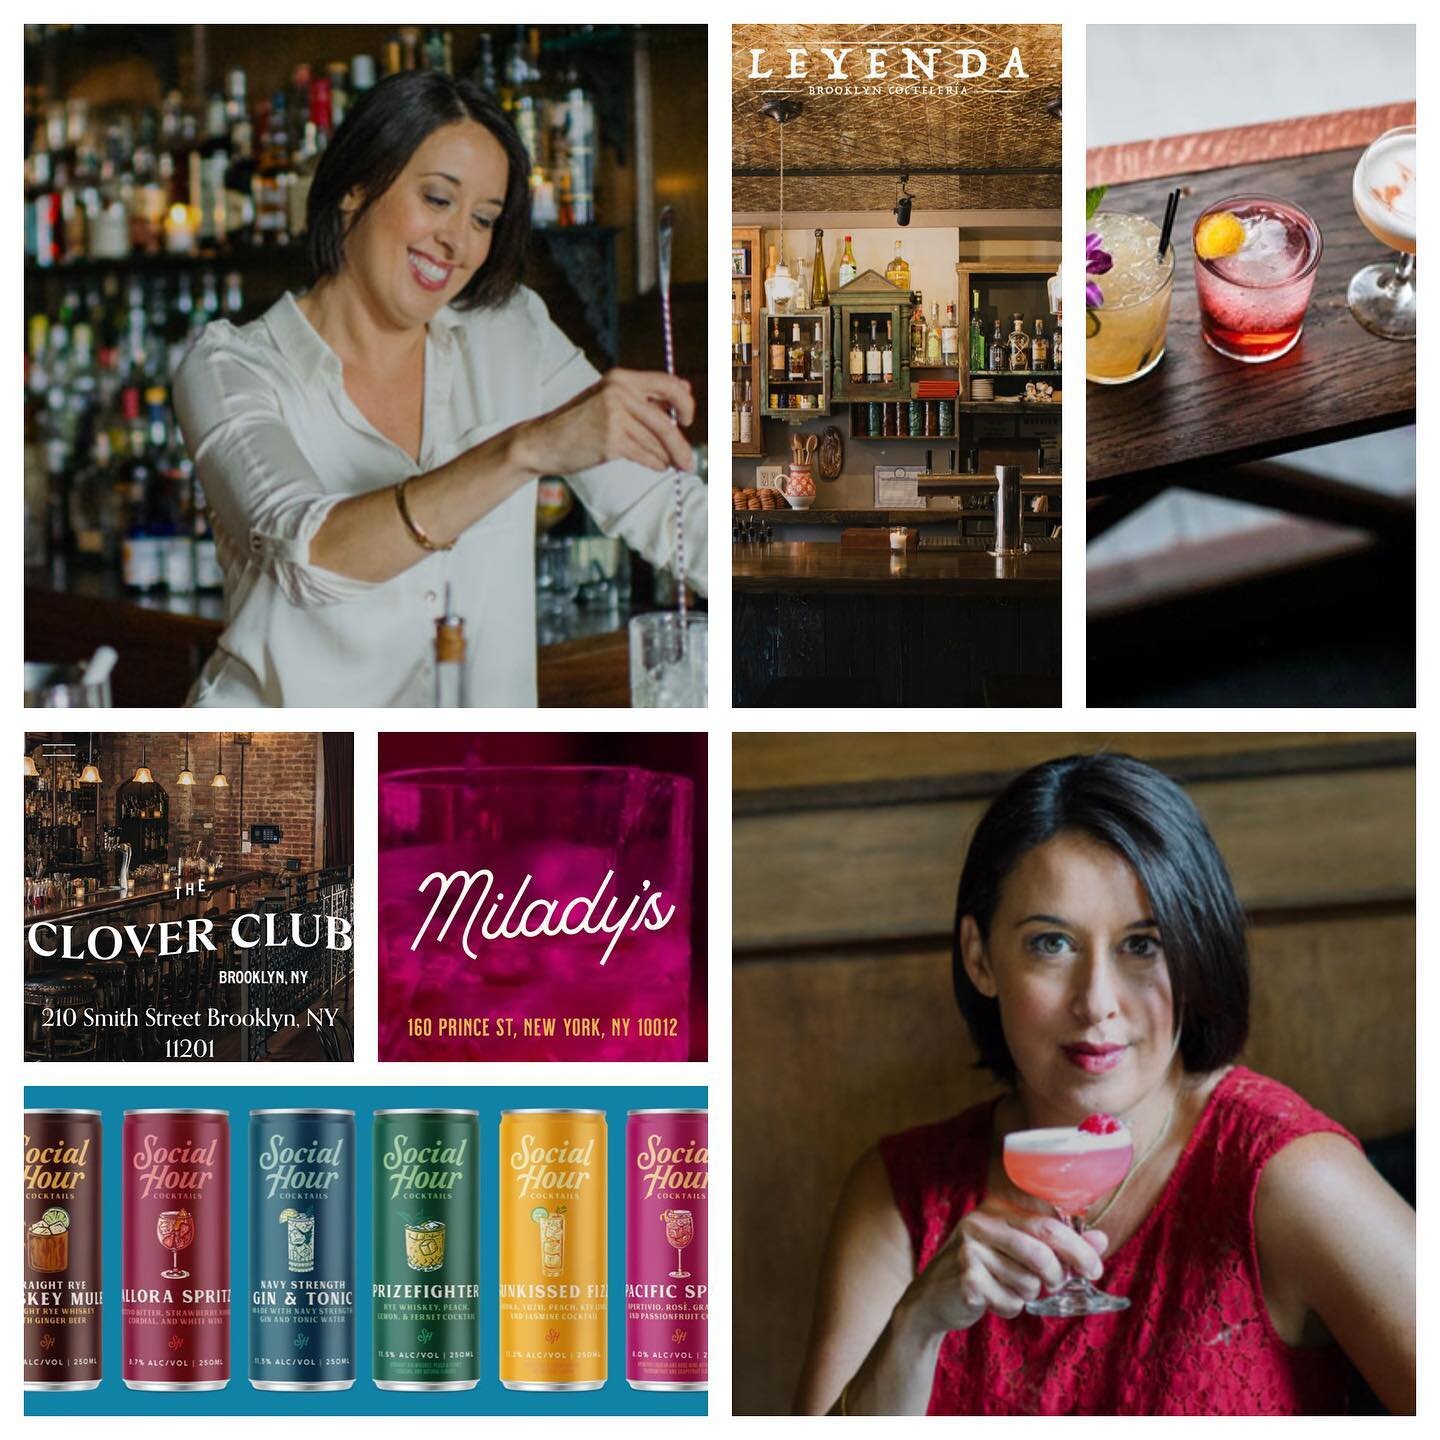 🧨🧨ALL THE BARS 🧨🧨

This week, we turn to one of the judges of Drink Masters. If you work in the cocktail world, you know who she is. Julie Reiner has been on the scene in San Francisco and NYC (and beyond) for decades but when she opened her firs